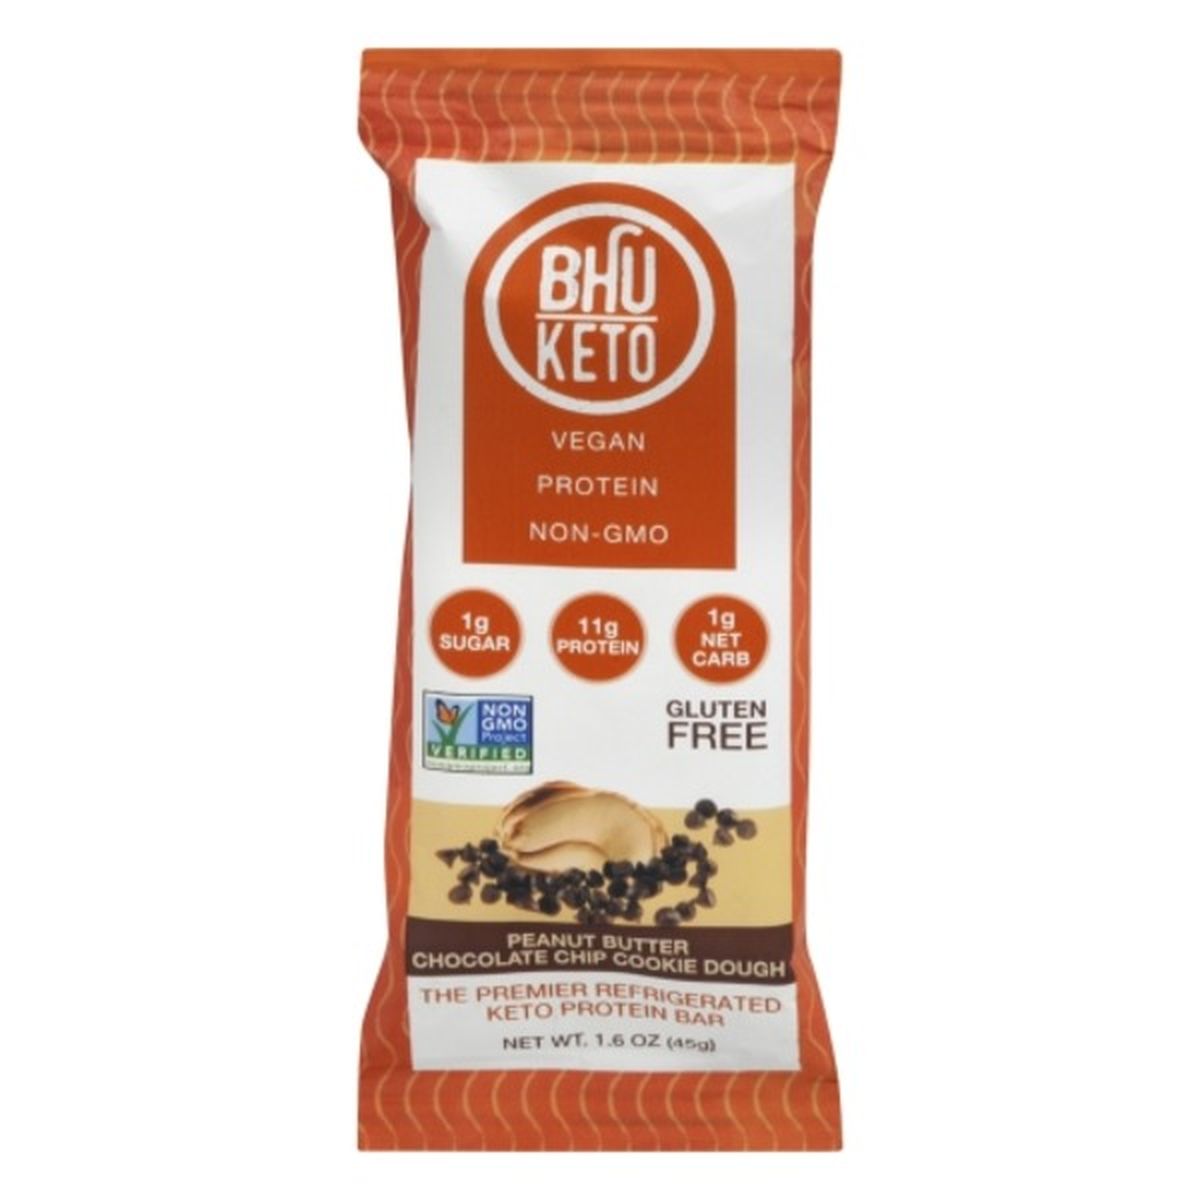 Calories in Bhu Protein Bar, Keto, Peanut Butter Chocolate Chip Cookie Dough